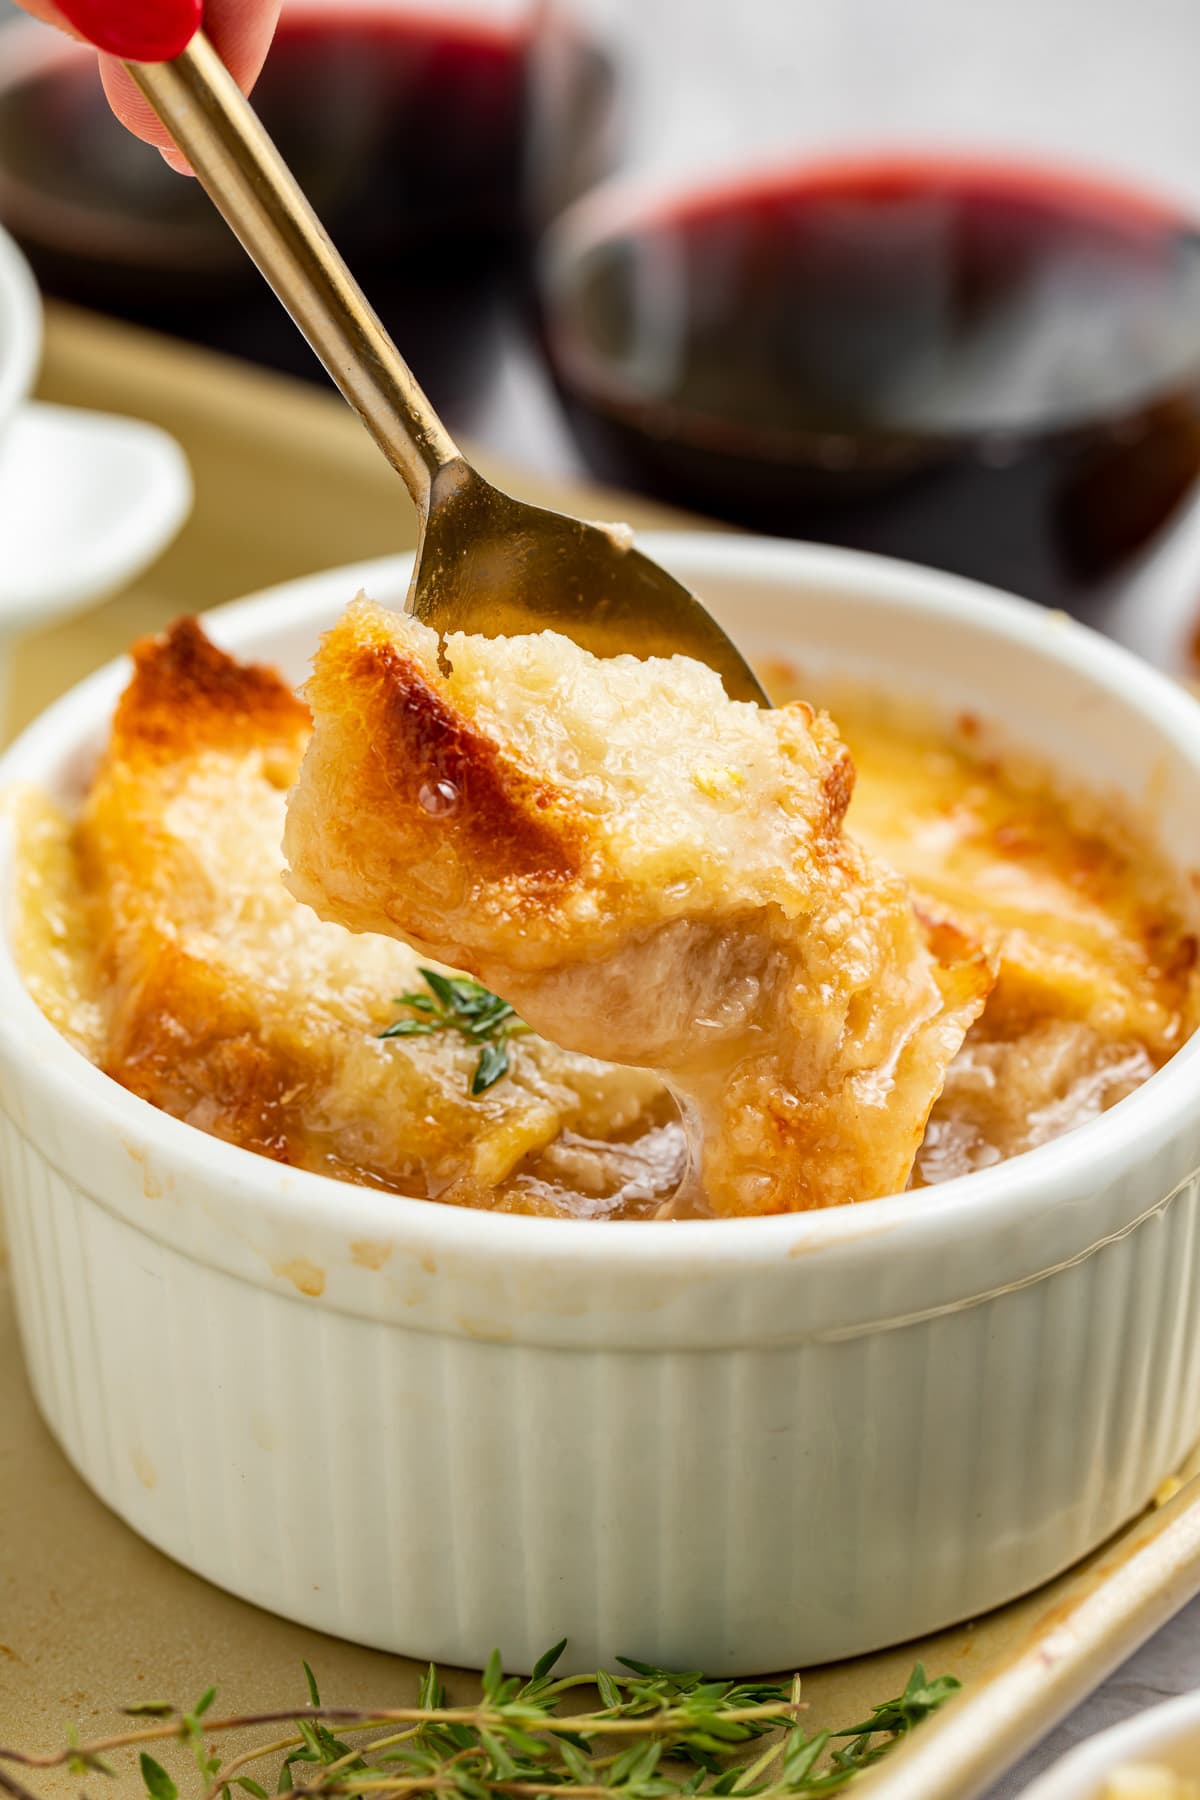 A spoon lifting a piece of French bread off the top of a ramekin holding Instant Pot French onion soup.